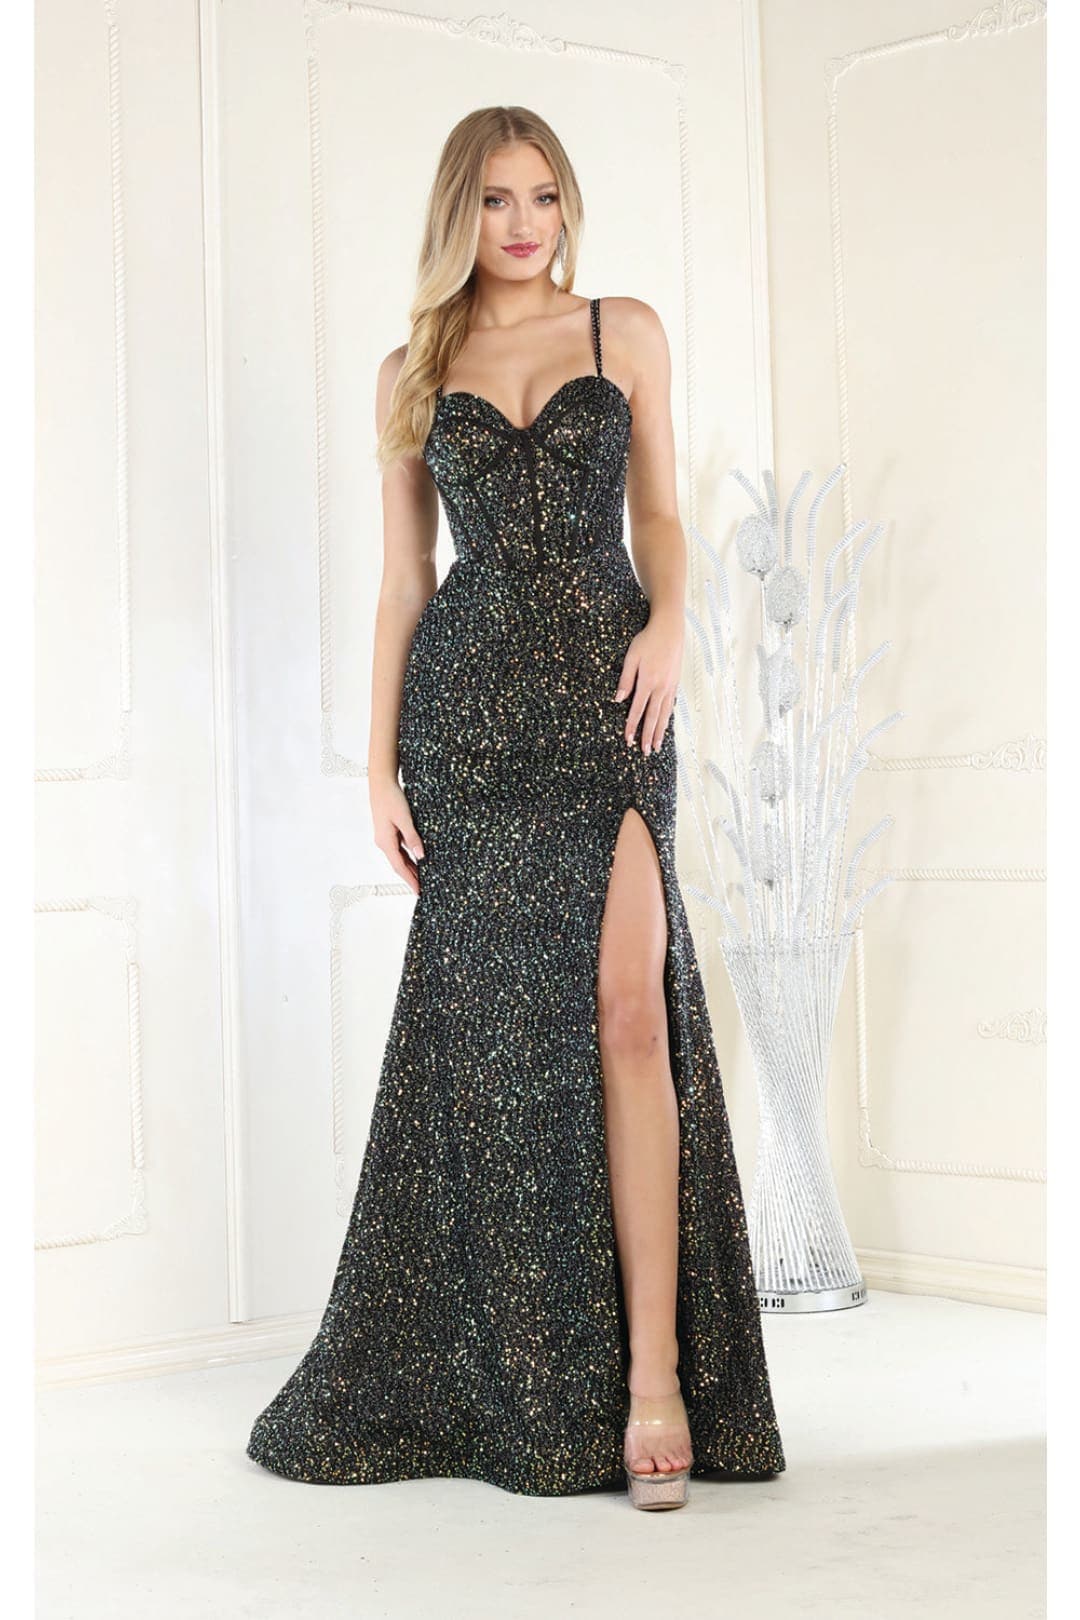 Royal Queen Embellished Corset Prom Gown RQ7981